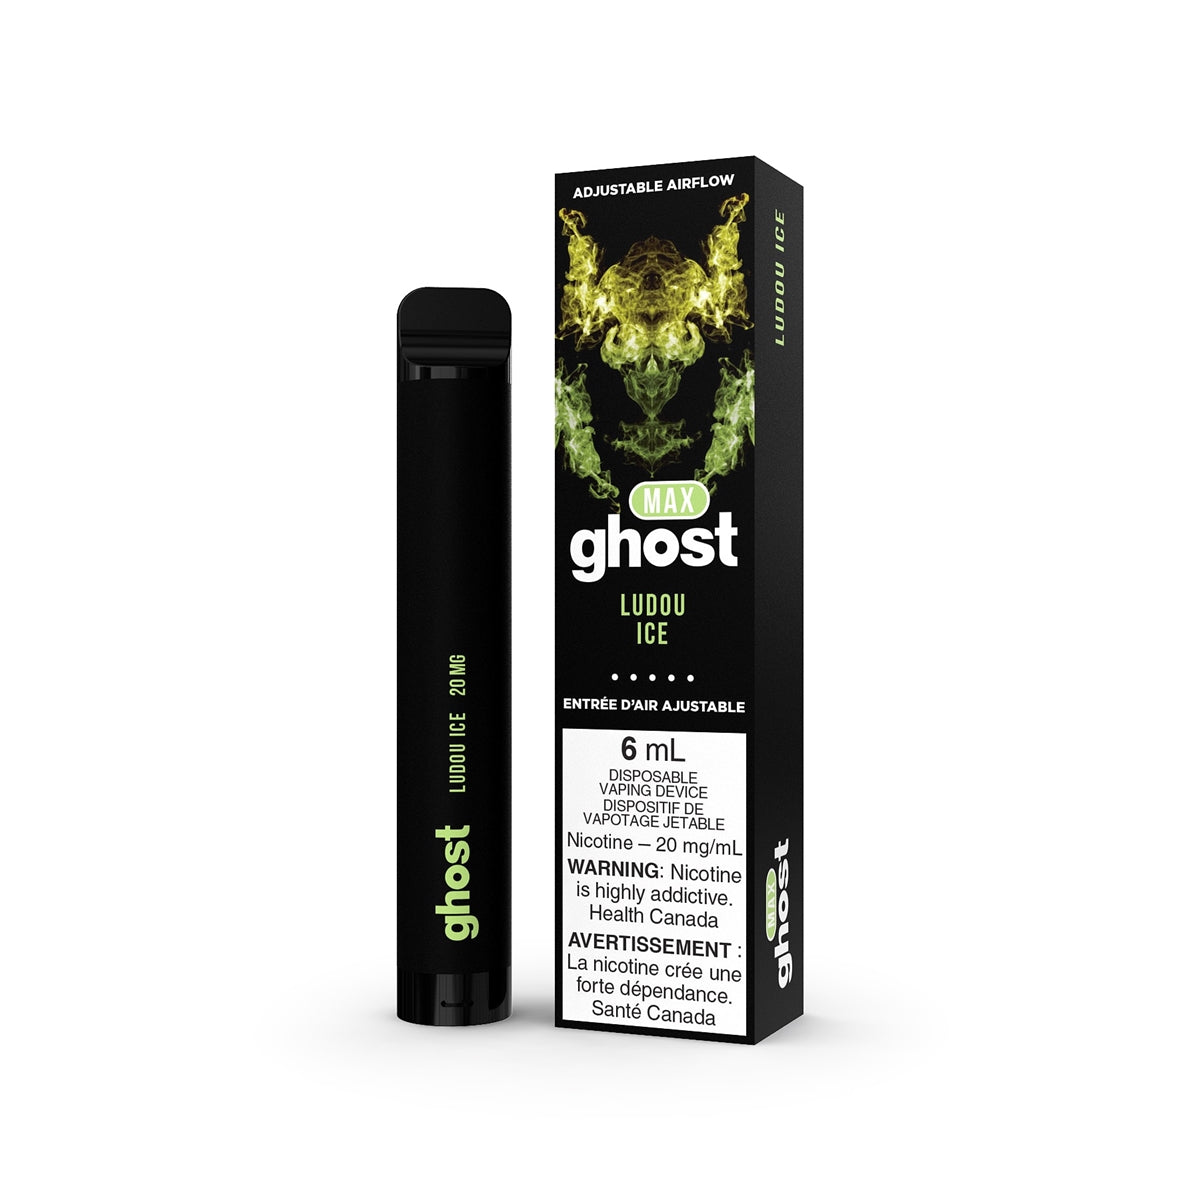 GHOST MAX Ludou Ice 20mg